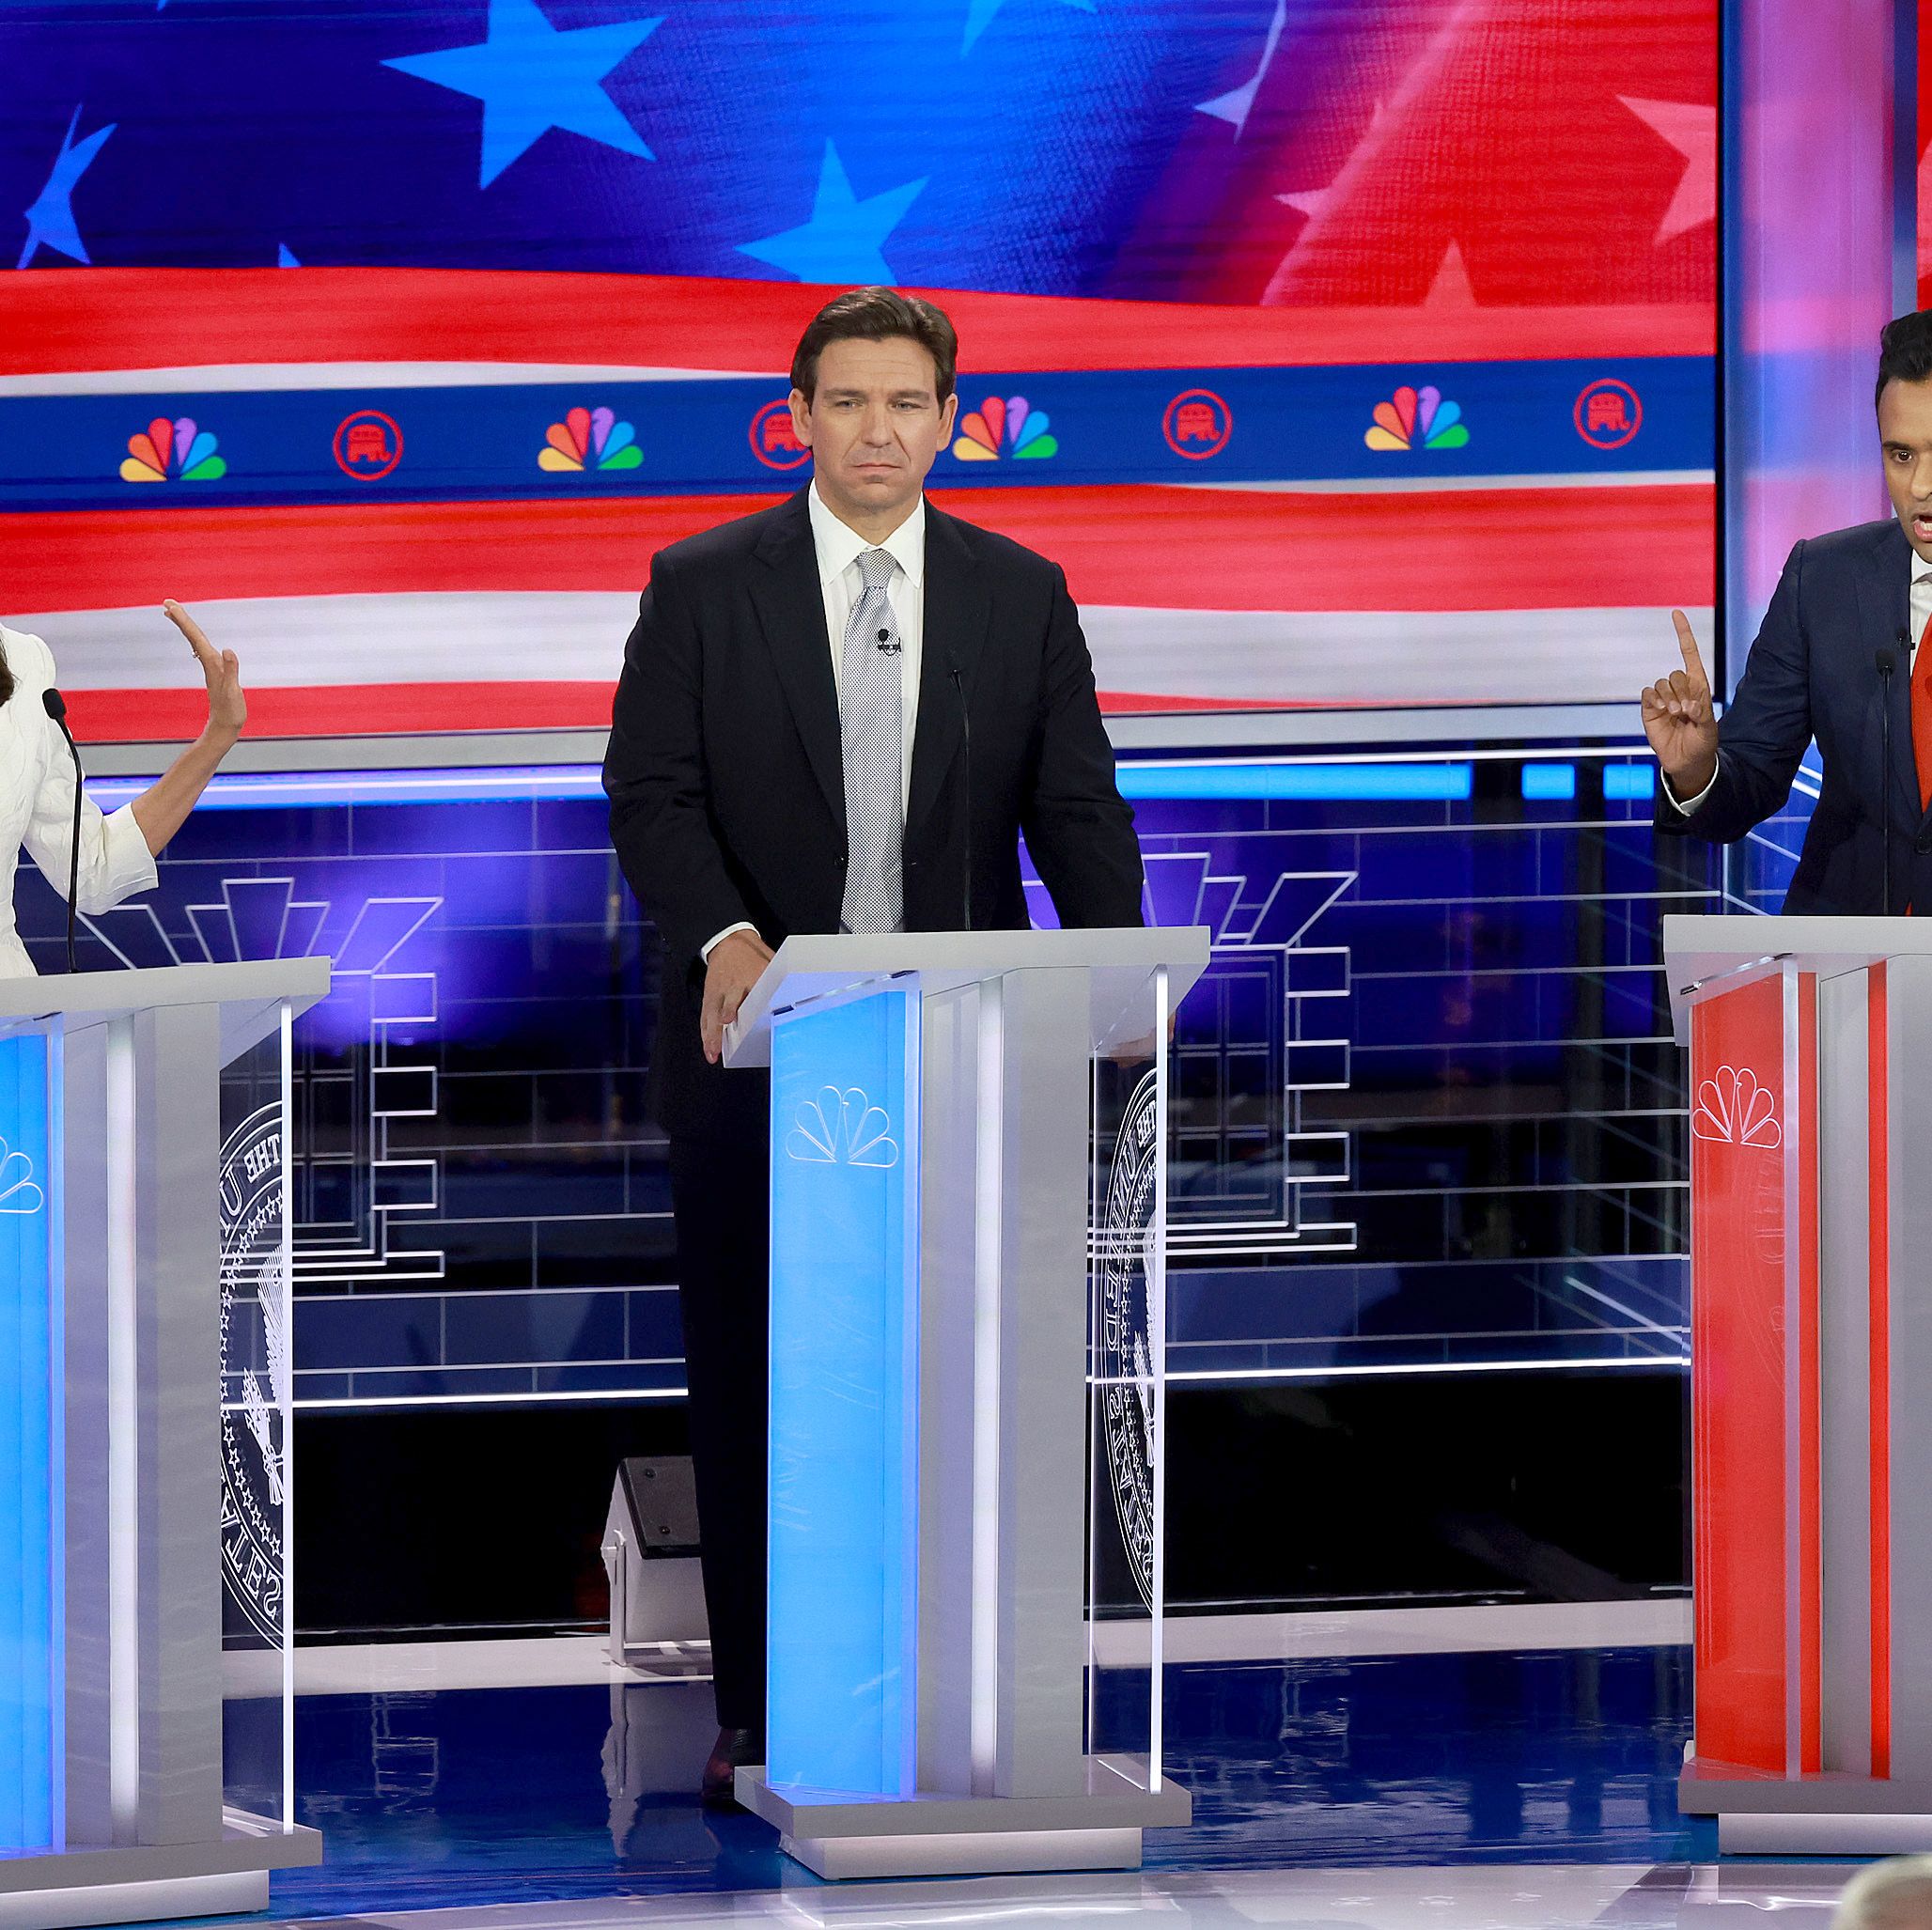 It's Hard to Say Who Was the Worst During the Republican Debate, But It Was Vivek Ramaswamy